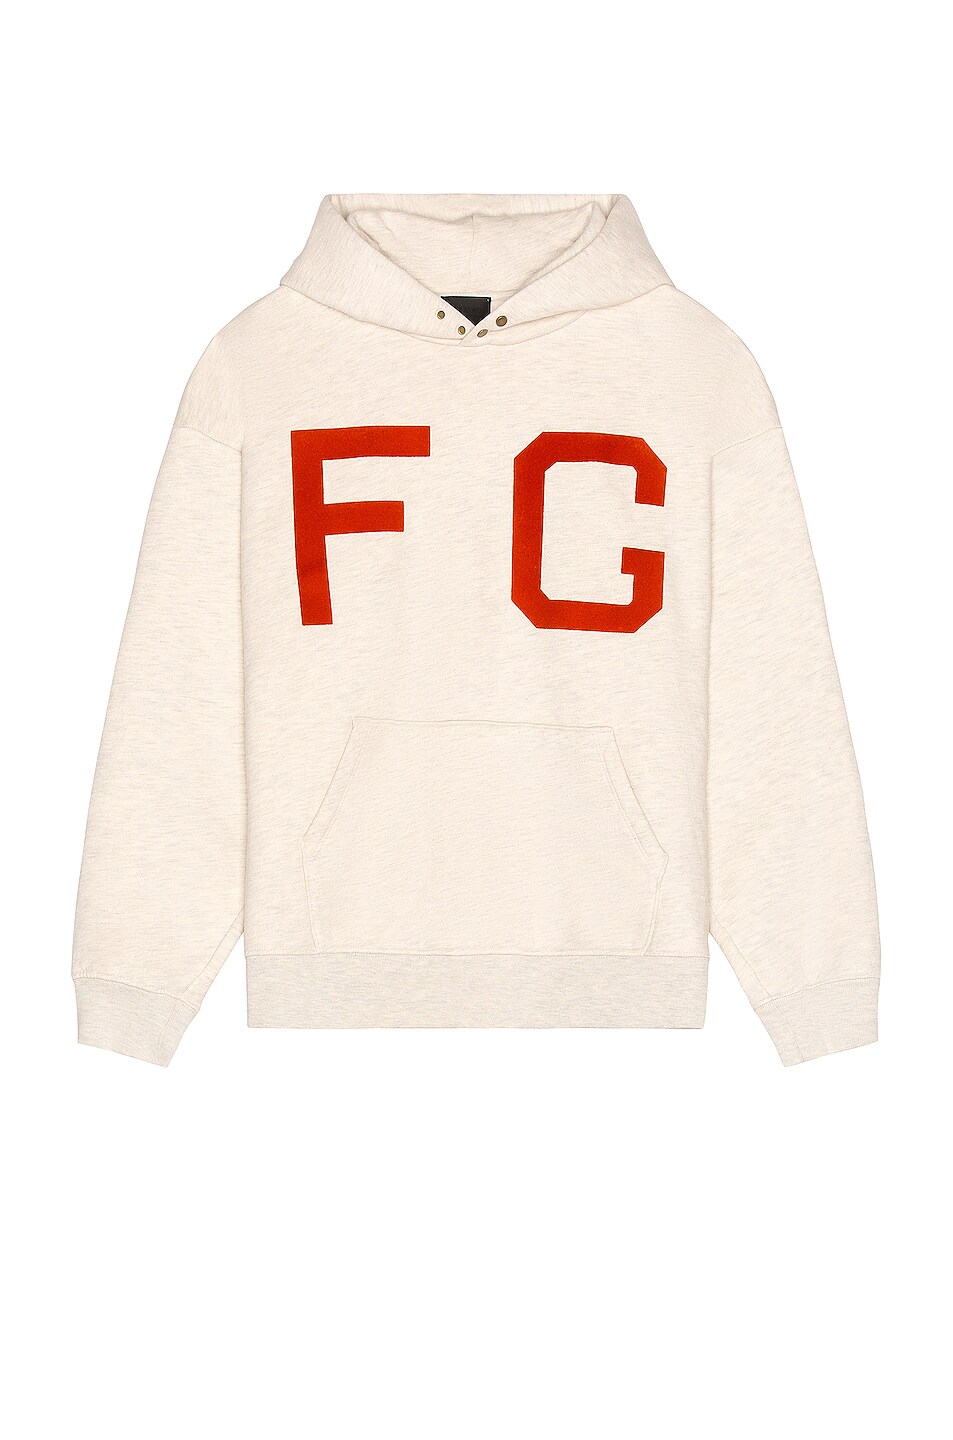 Image 1 of Fear of God Monarch Hoodie in Cream Heather